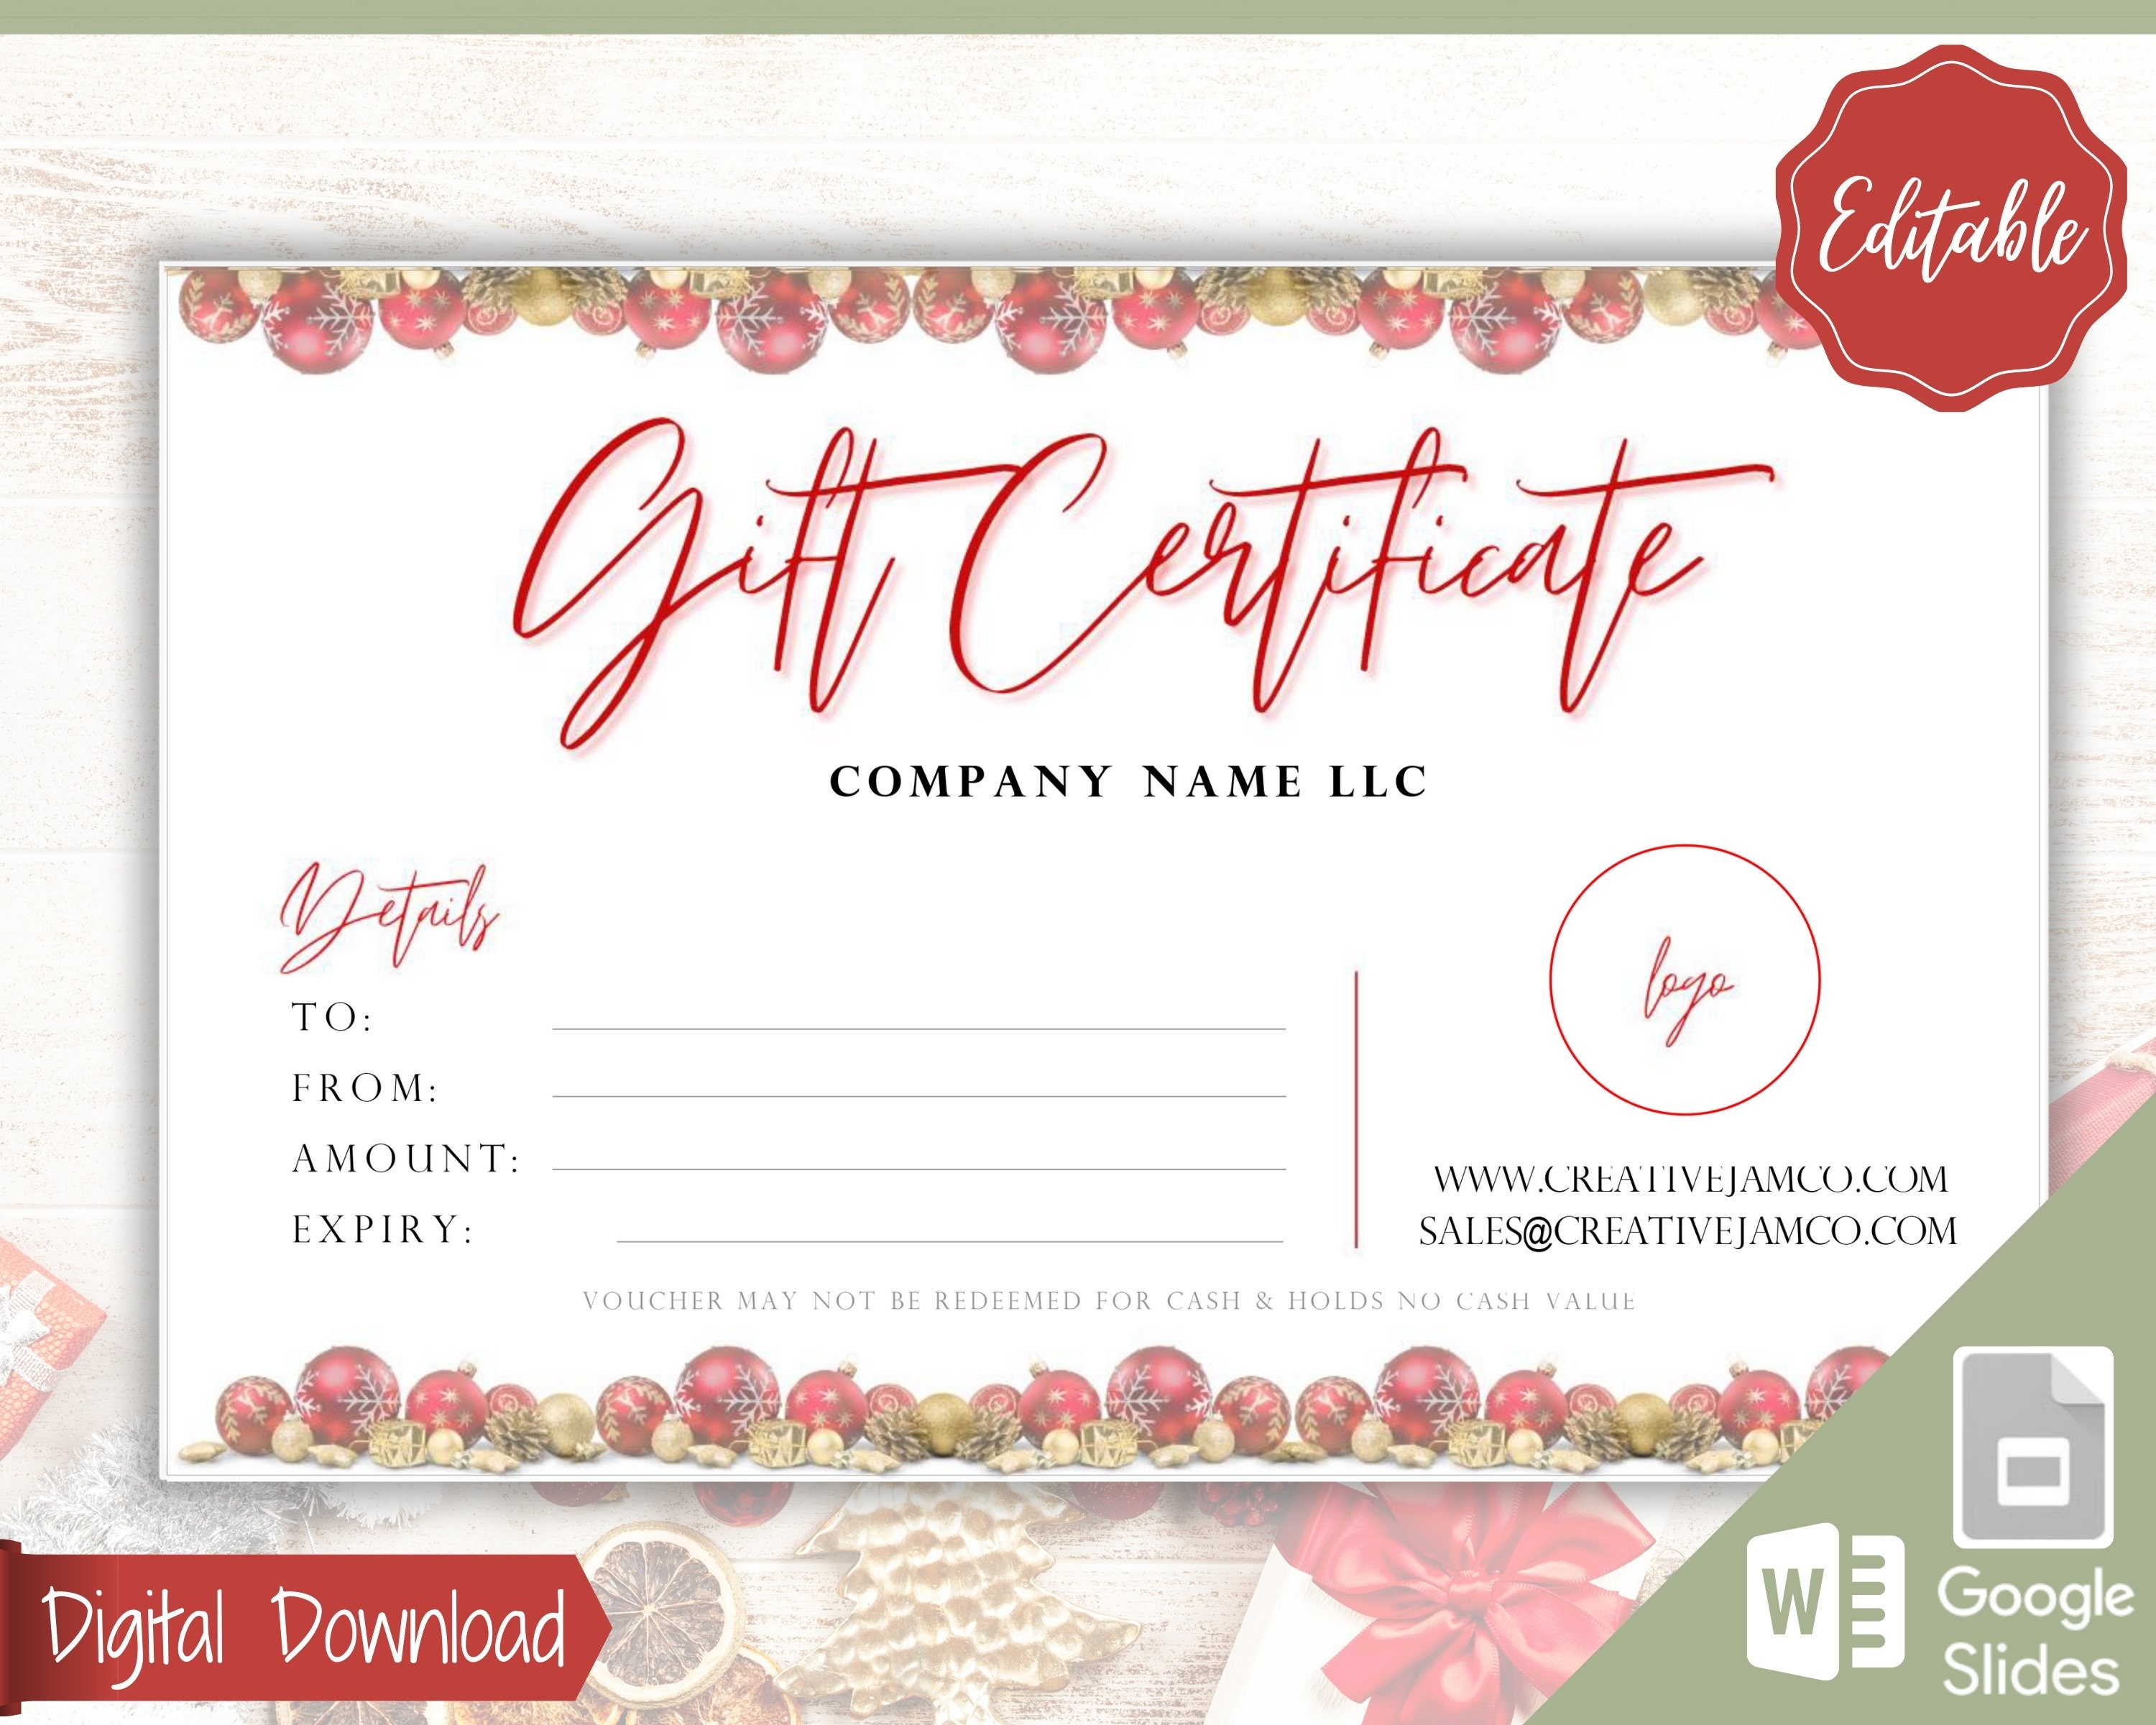 Gift Voucher Templates - Word Templates for Free Download